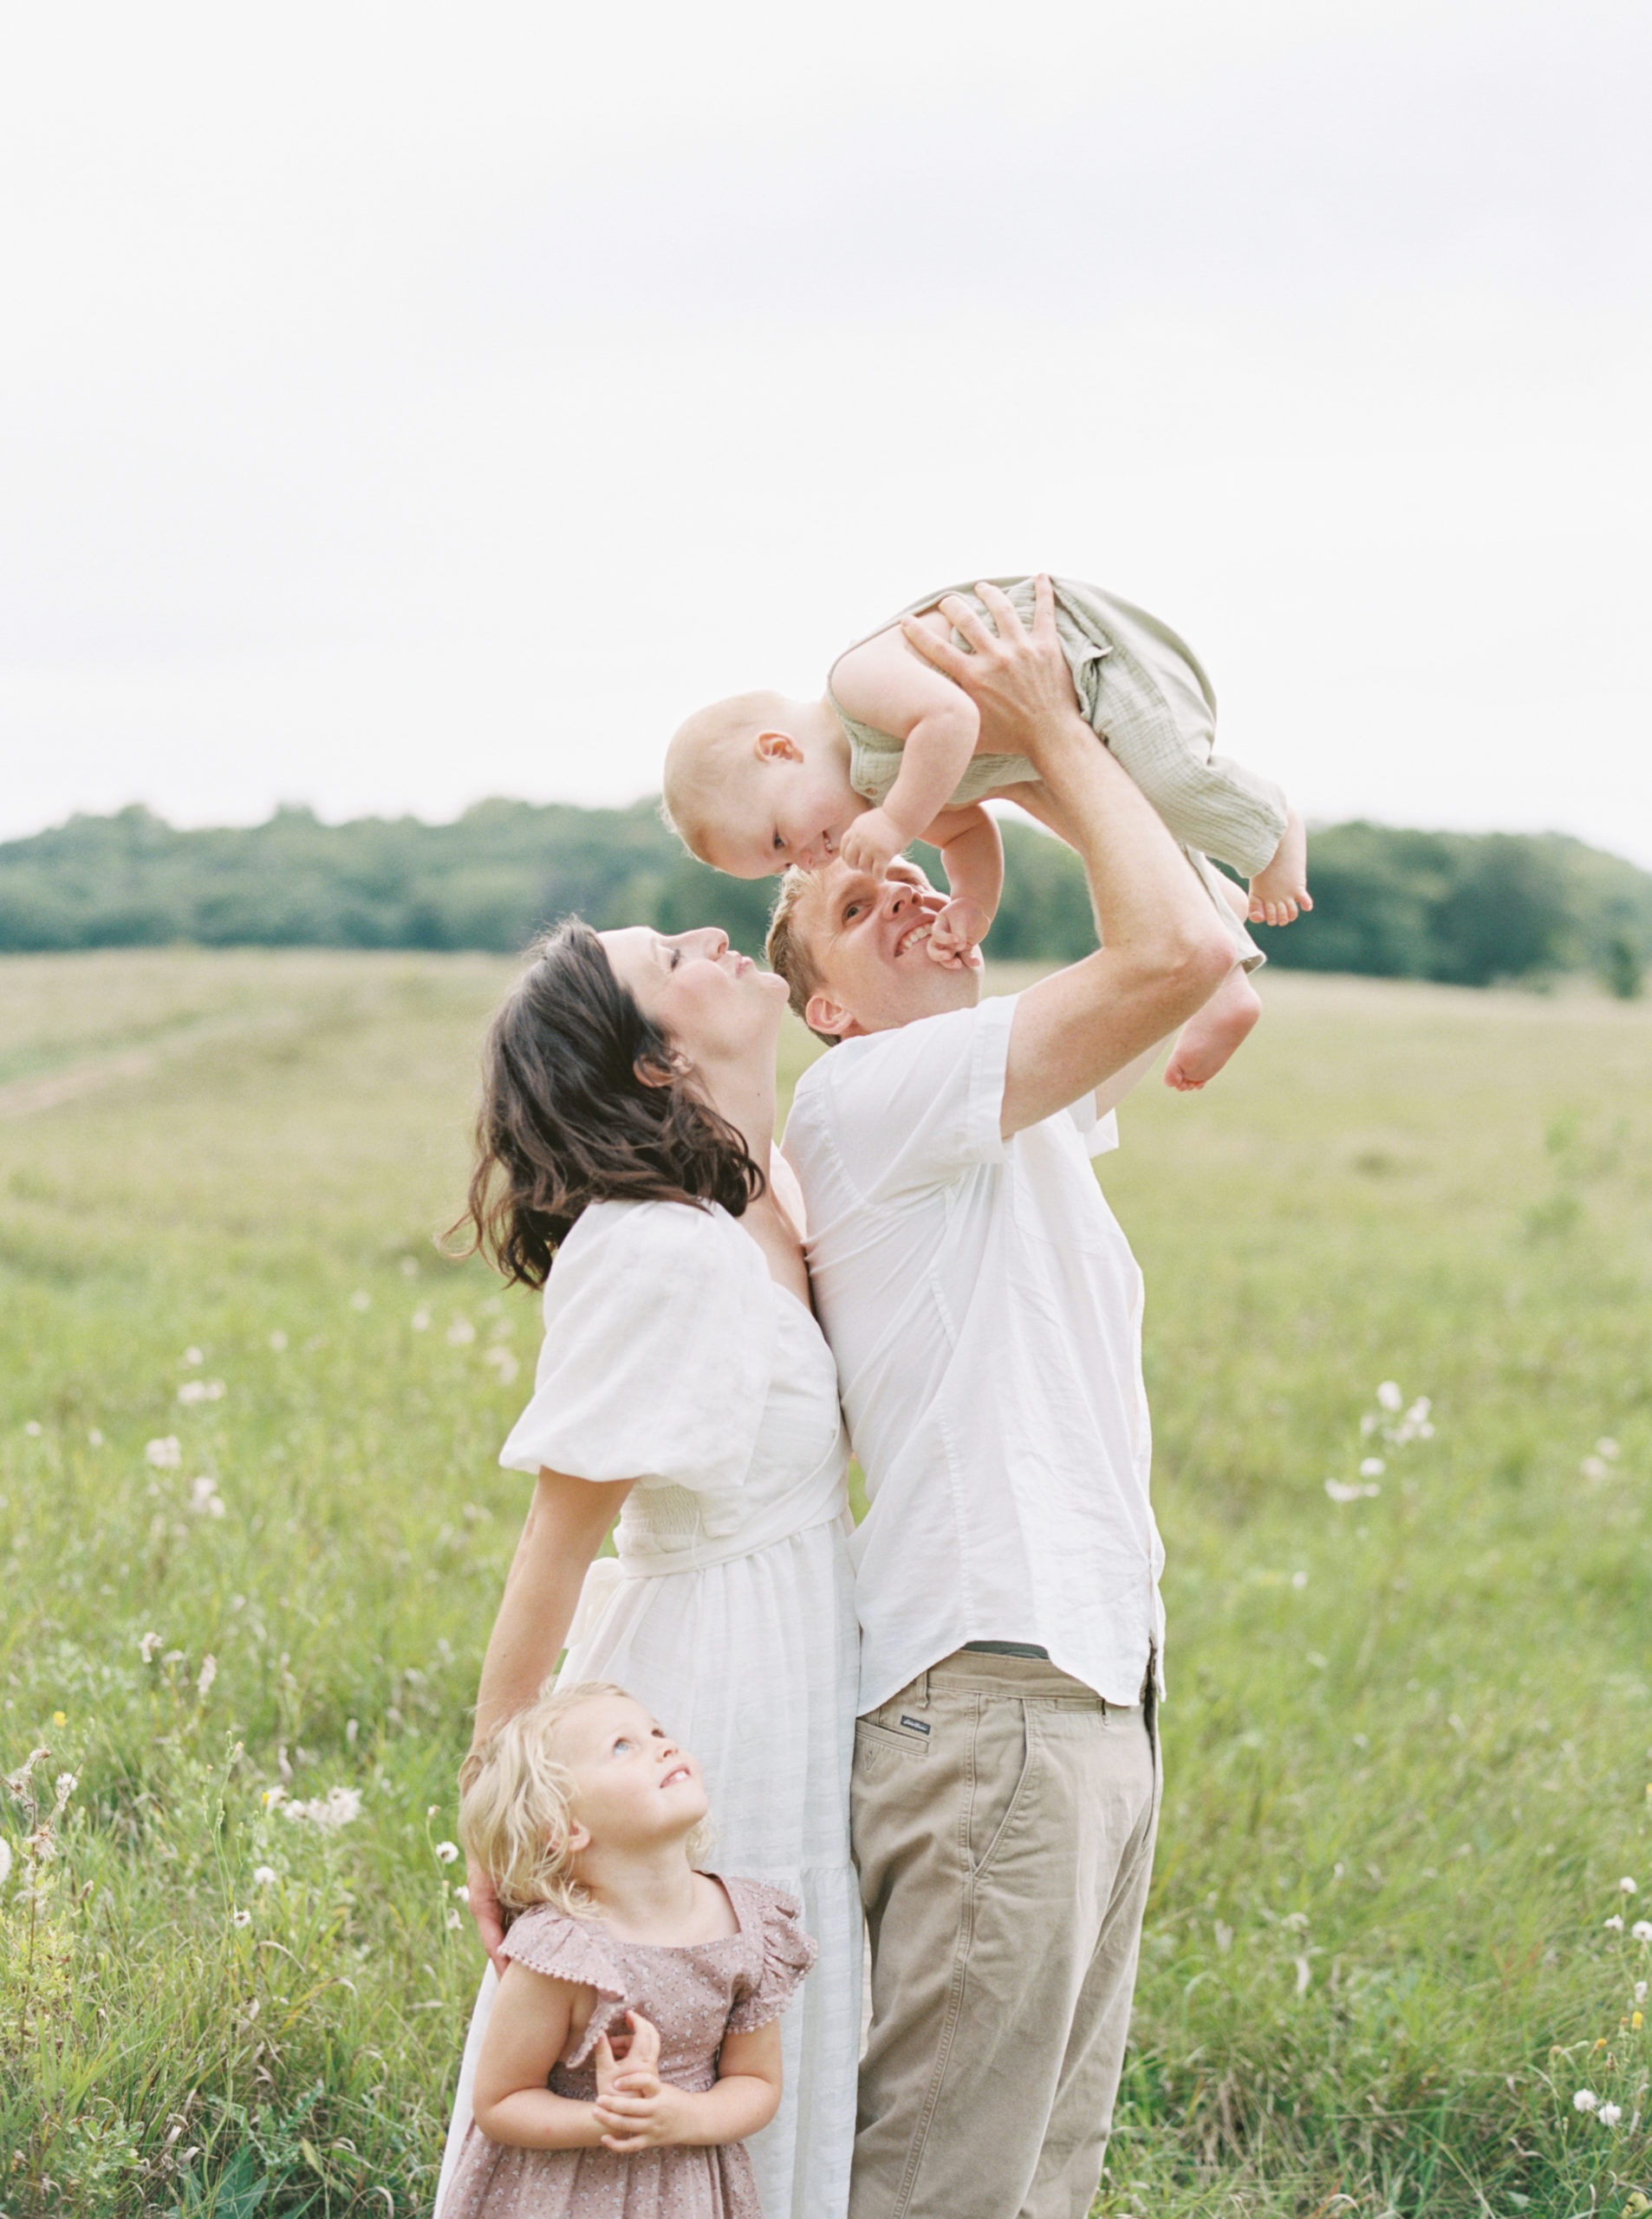 family portrait in a grassy green field setting in Milwaukee in the summer